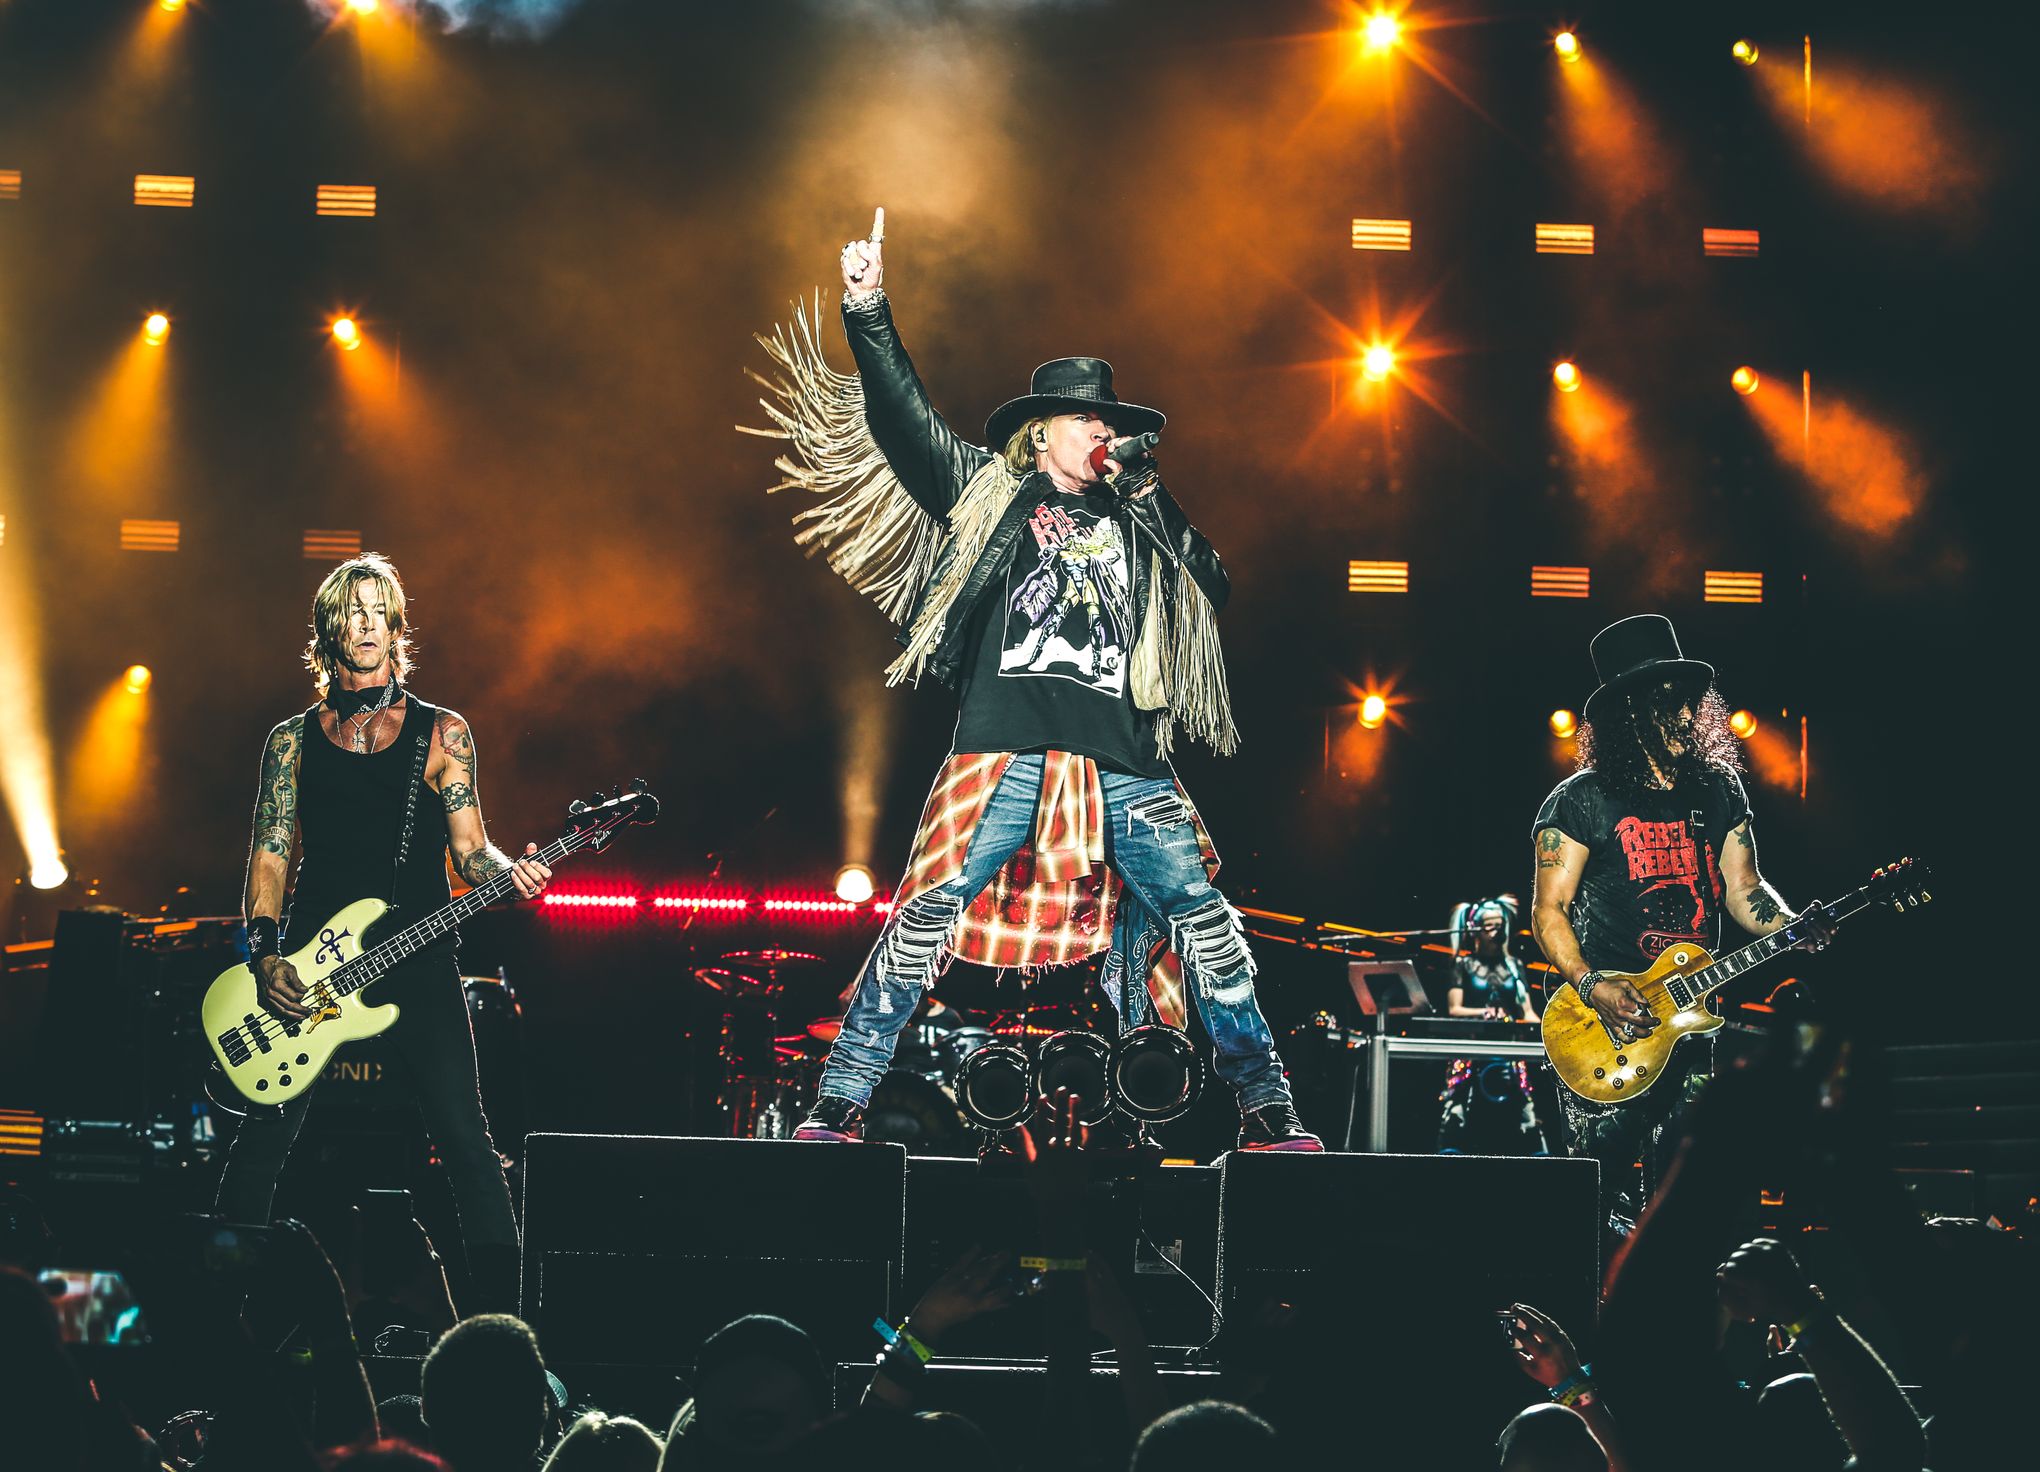 Guns N' Roses all hearts & flowers on reunion tour